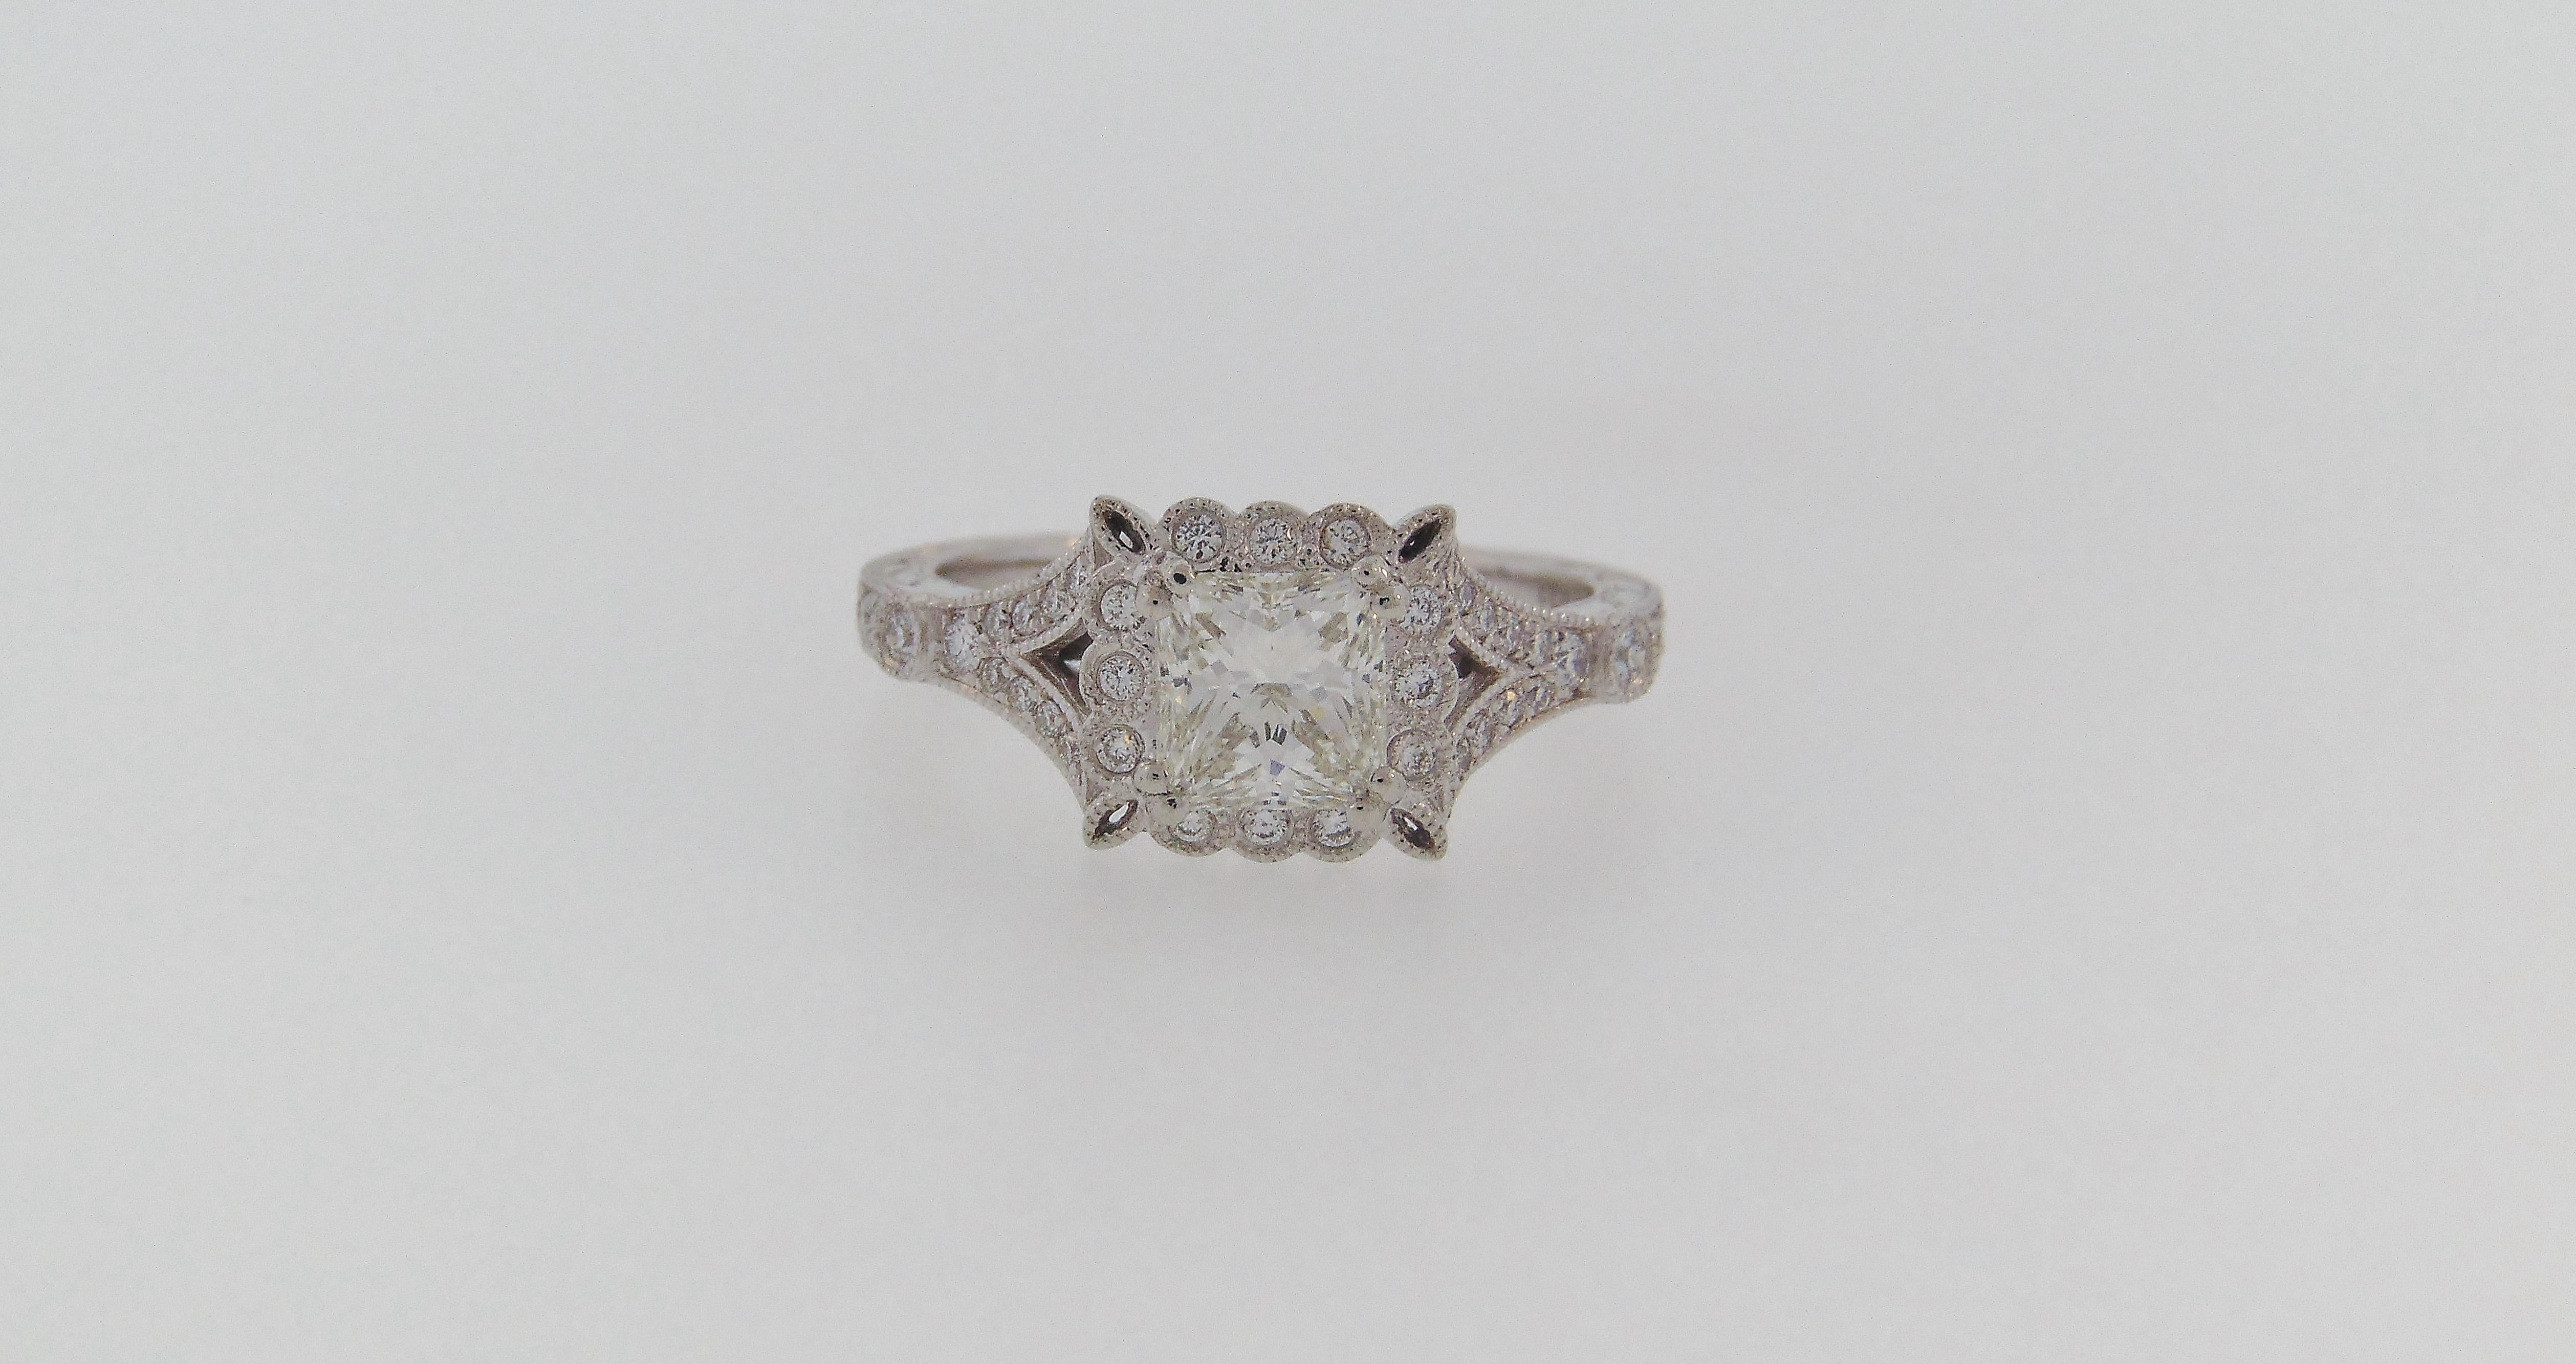 Designed by Amavida, intricately detailed vintage reproduction platinum mounting.  The ring is centered by one (1) princess cut diamond weighing 1.02 carats, graded GIA SI1 clarity, I color.  The mounting is further accented with a beaded edge and